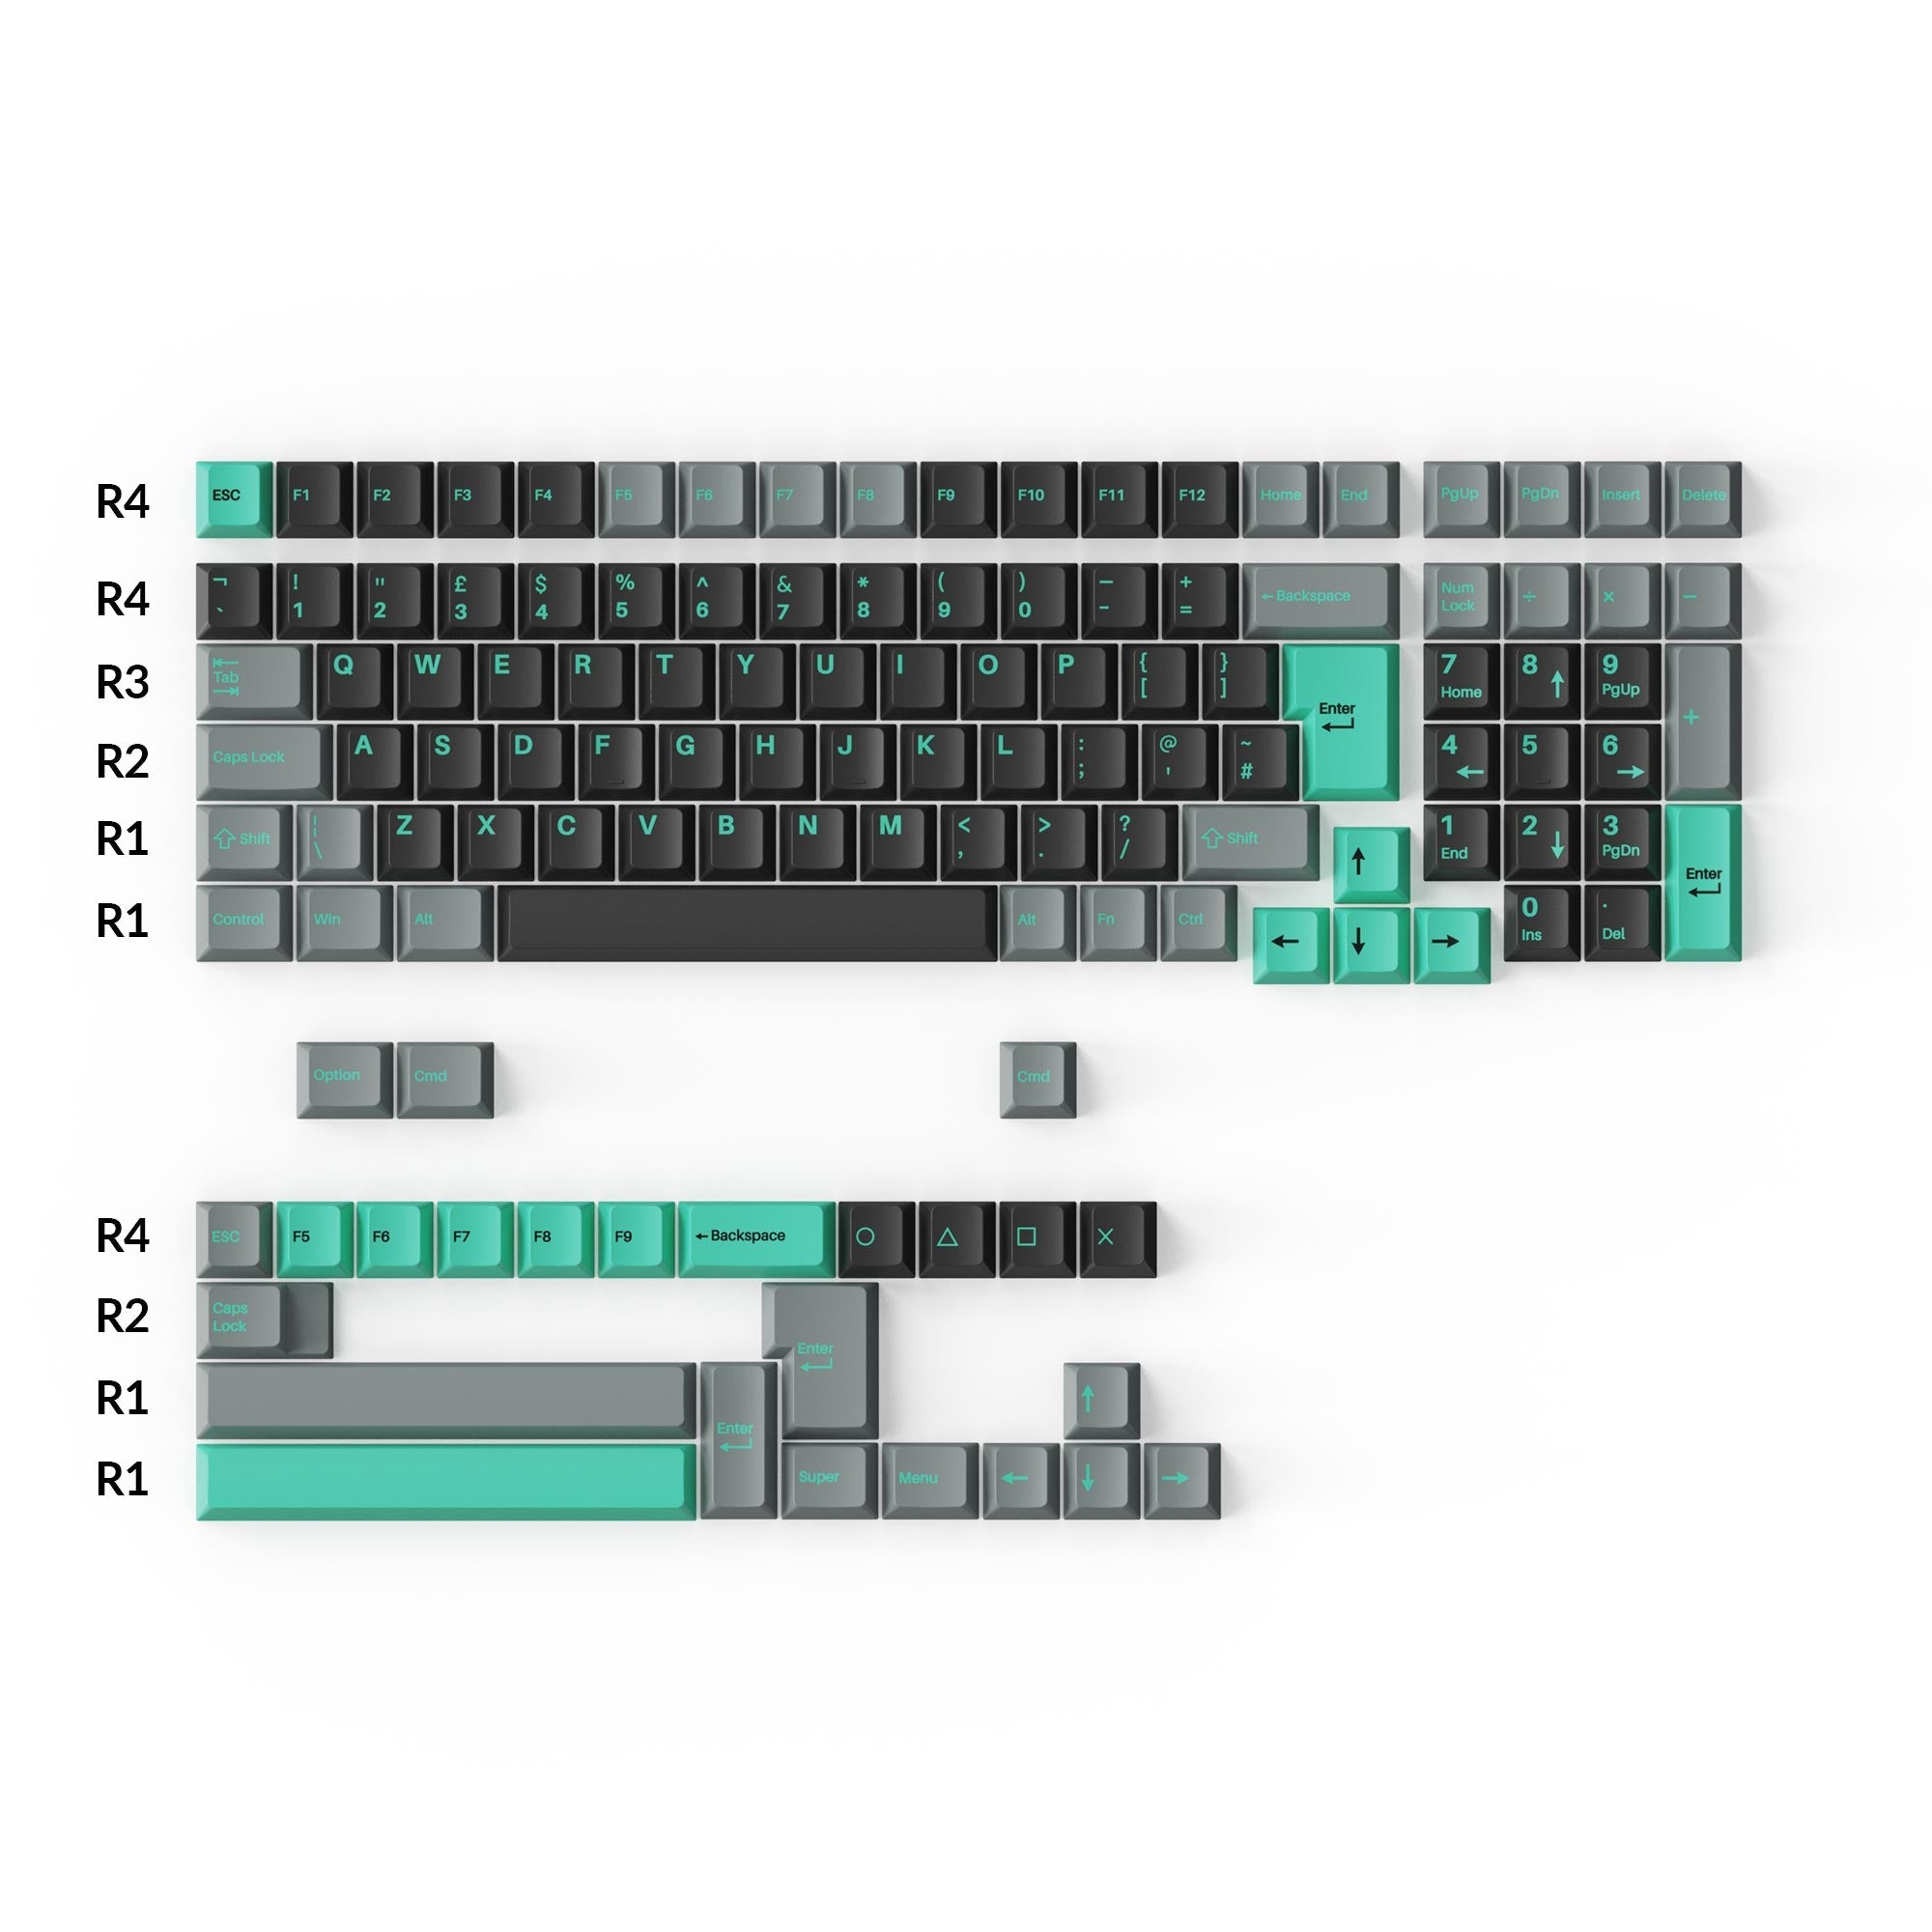 Keychron double shot PBT Cherry profile full set keycap set hacker for UK ISO 96% and 75% and 65% layouts